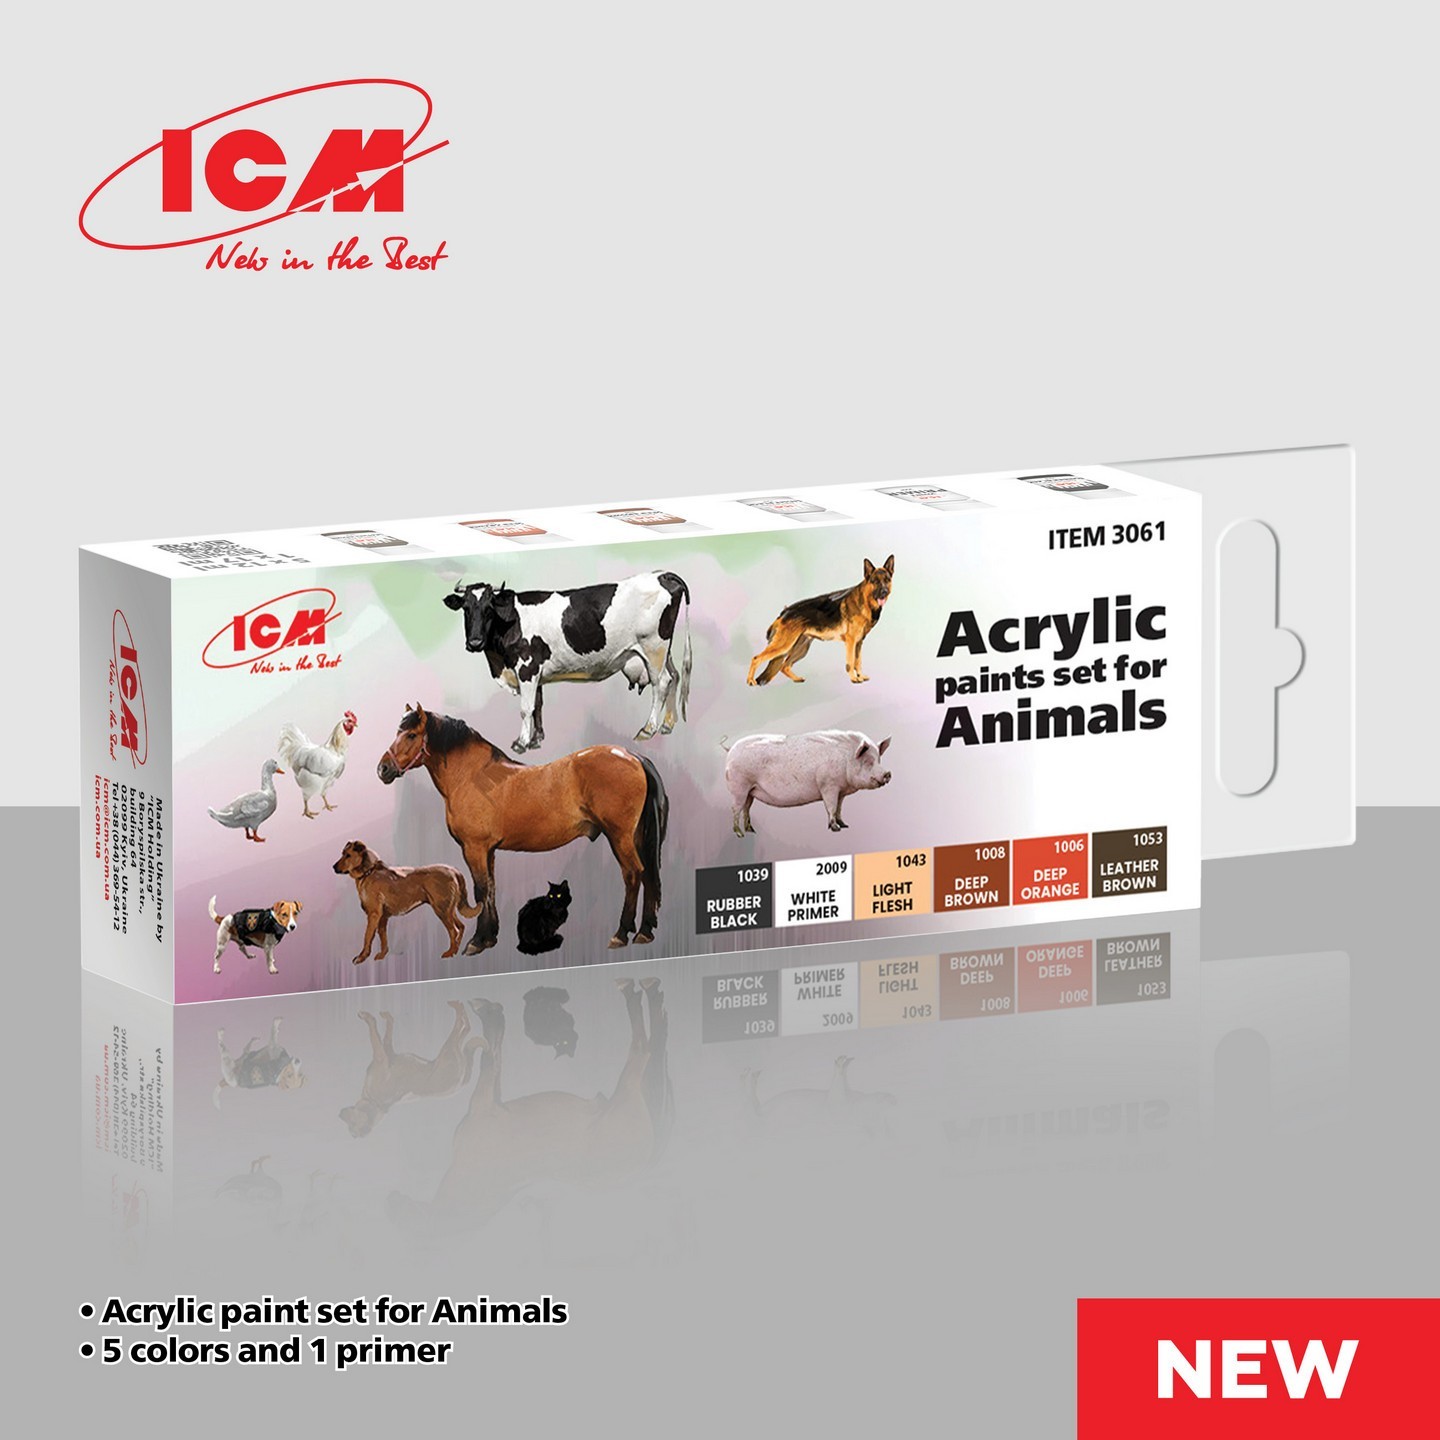 Acrylic paints set for Animals